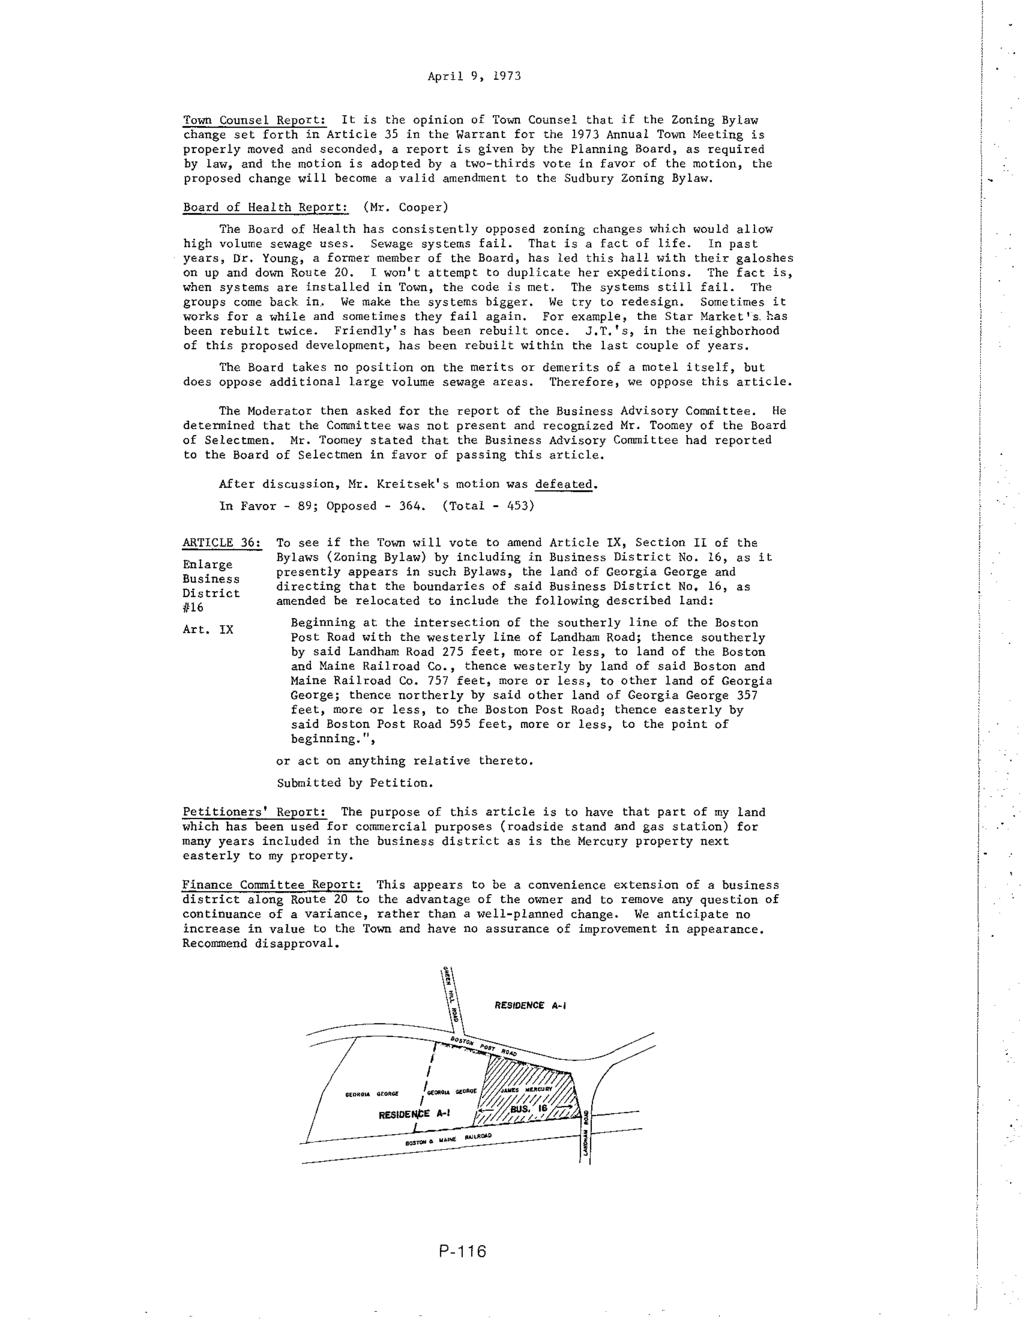 April 9, 1973 Town Counsel Report: It is the op1n1on of Town Counsel that if the Zoning Bylaw change set forth in Article 35 in the Warrant for the 1973 Annual Town Heeting is properly moved and